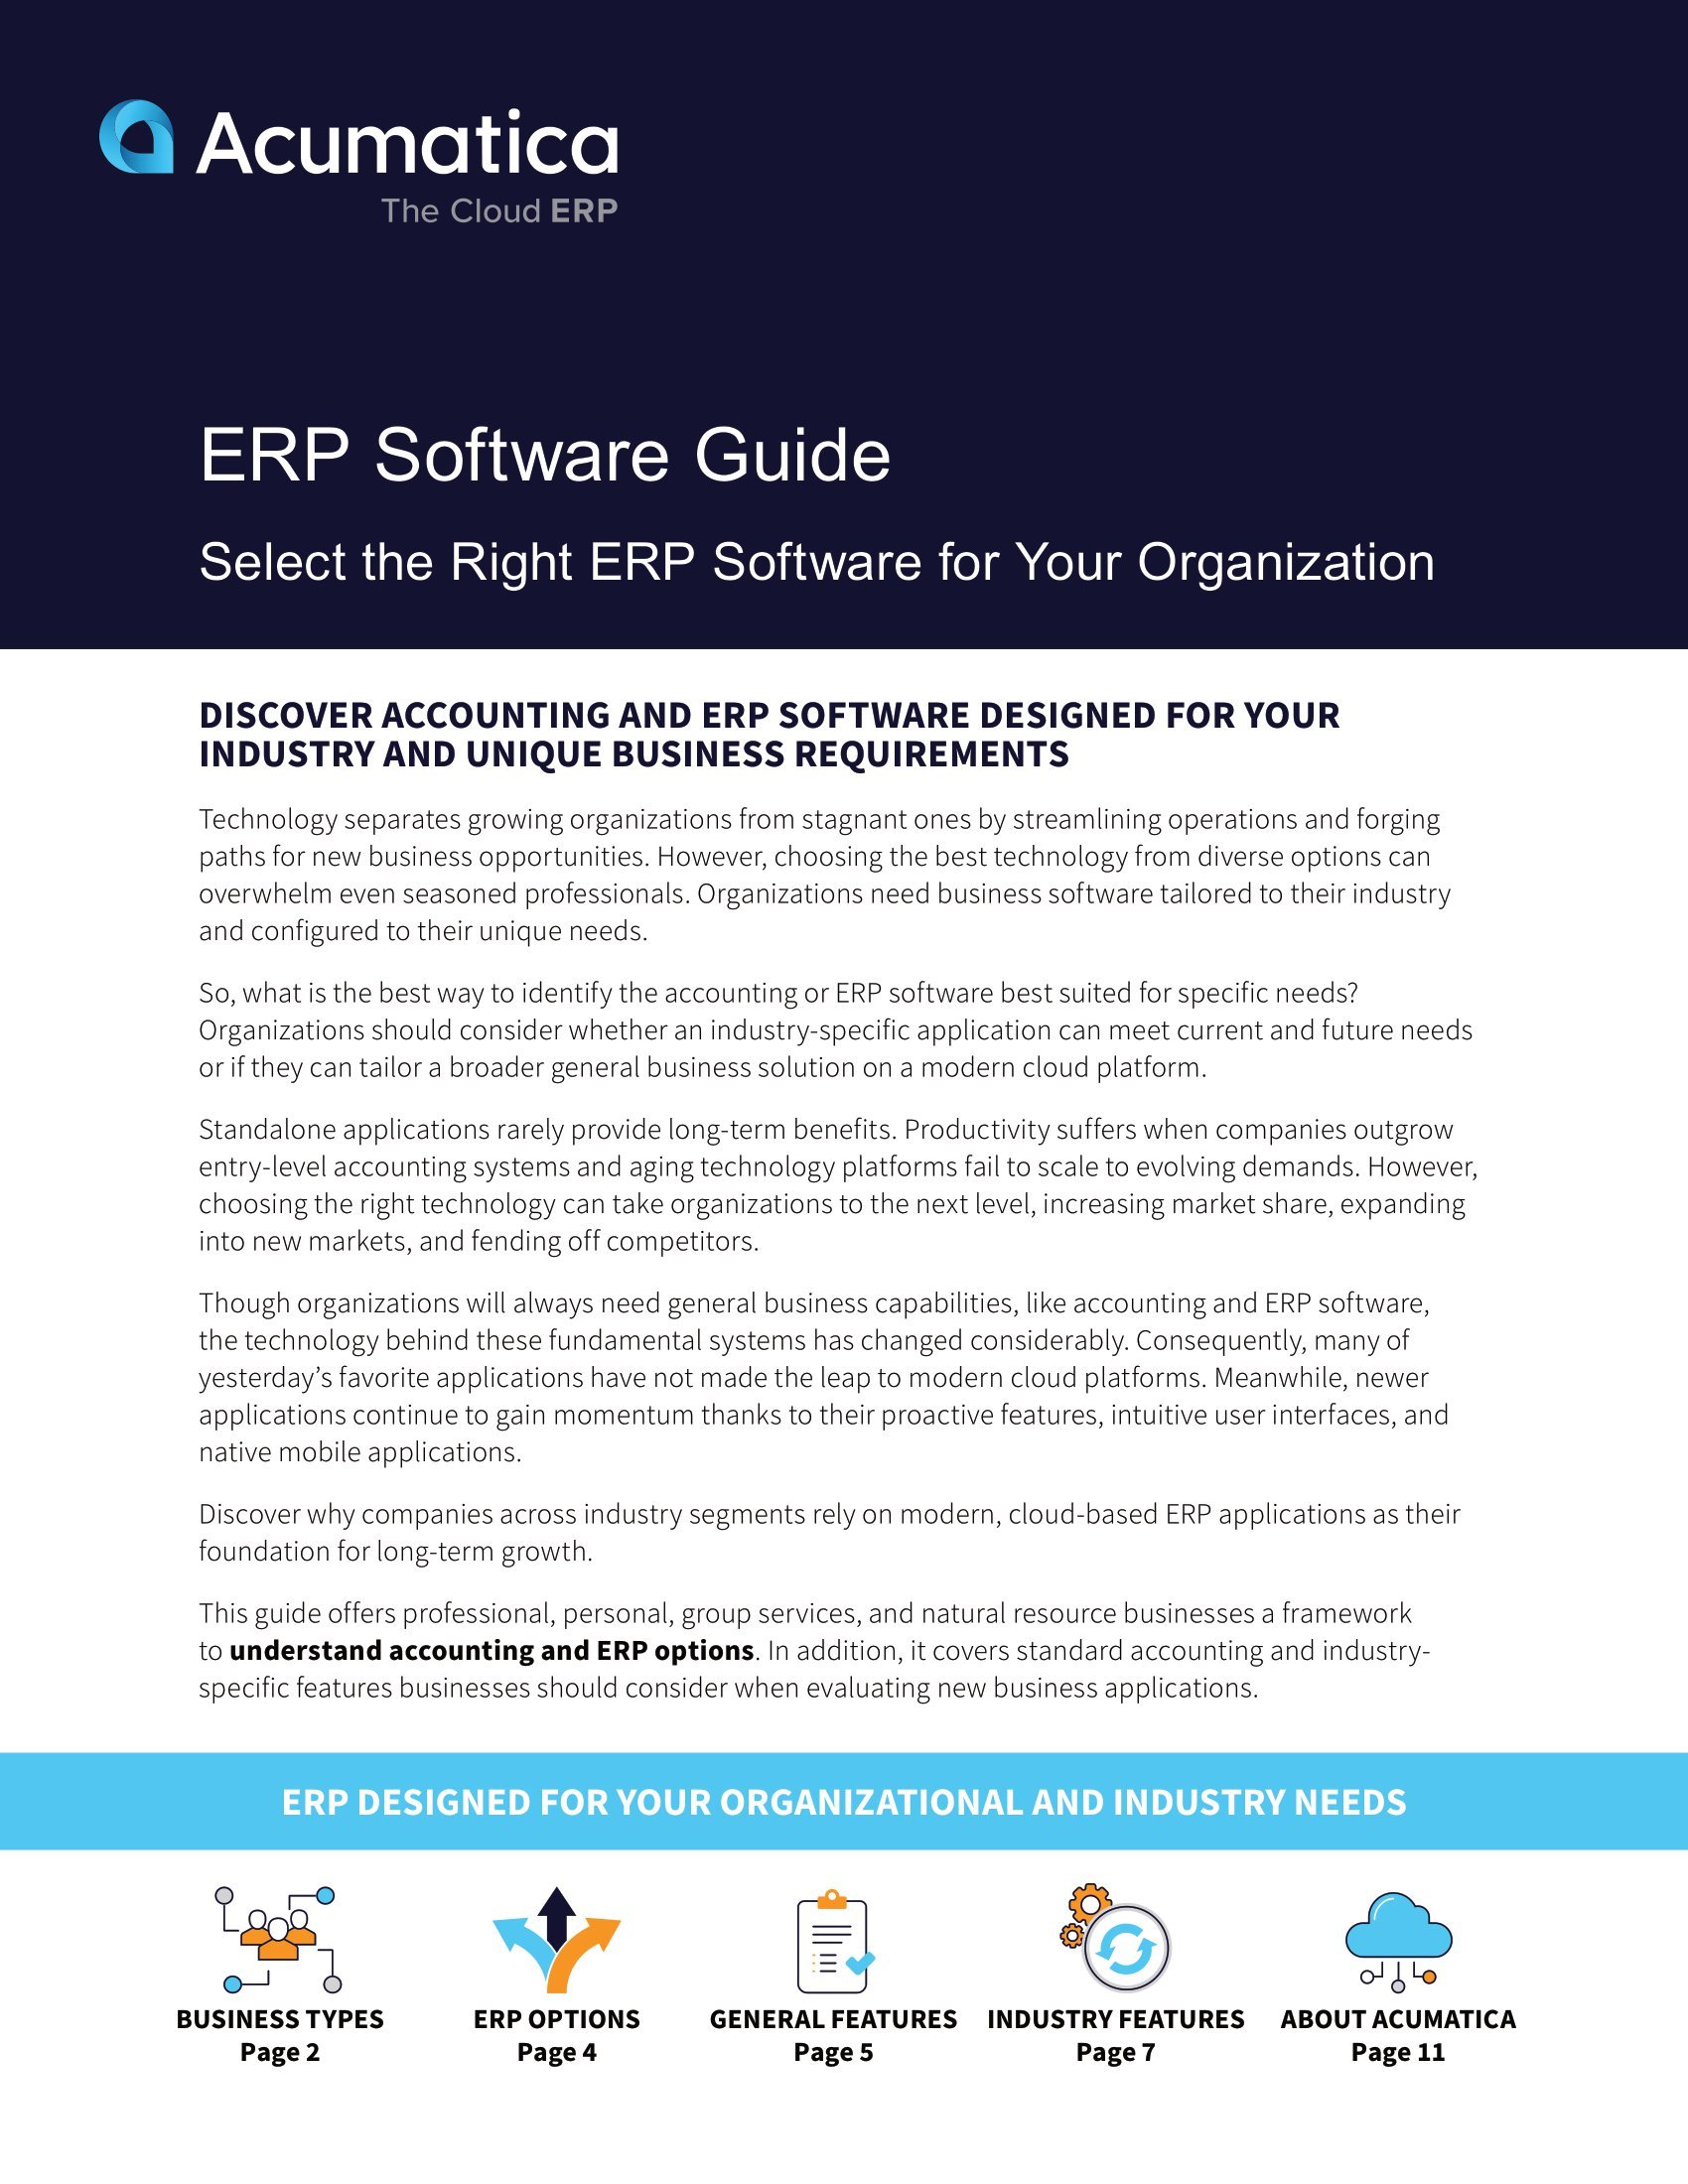 How To Select the Right ERP Software